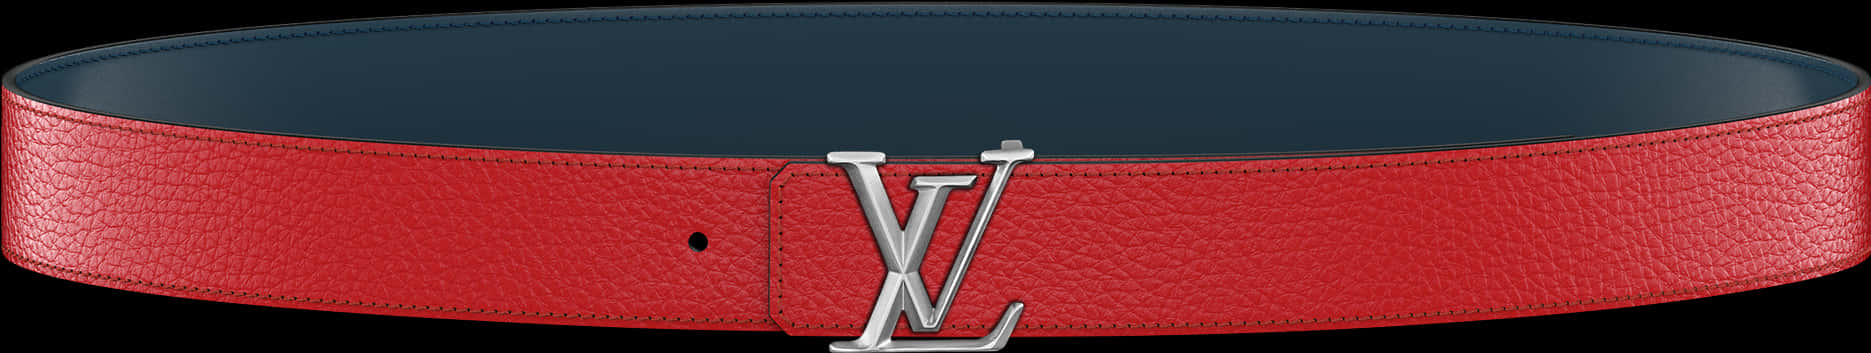 Louis Vuitton Red Leather Beltwith Silver L V Buckle PNG image